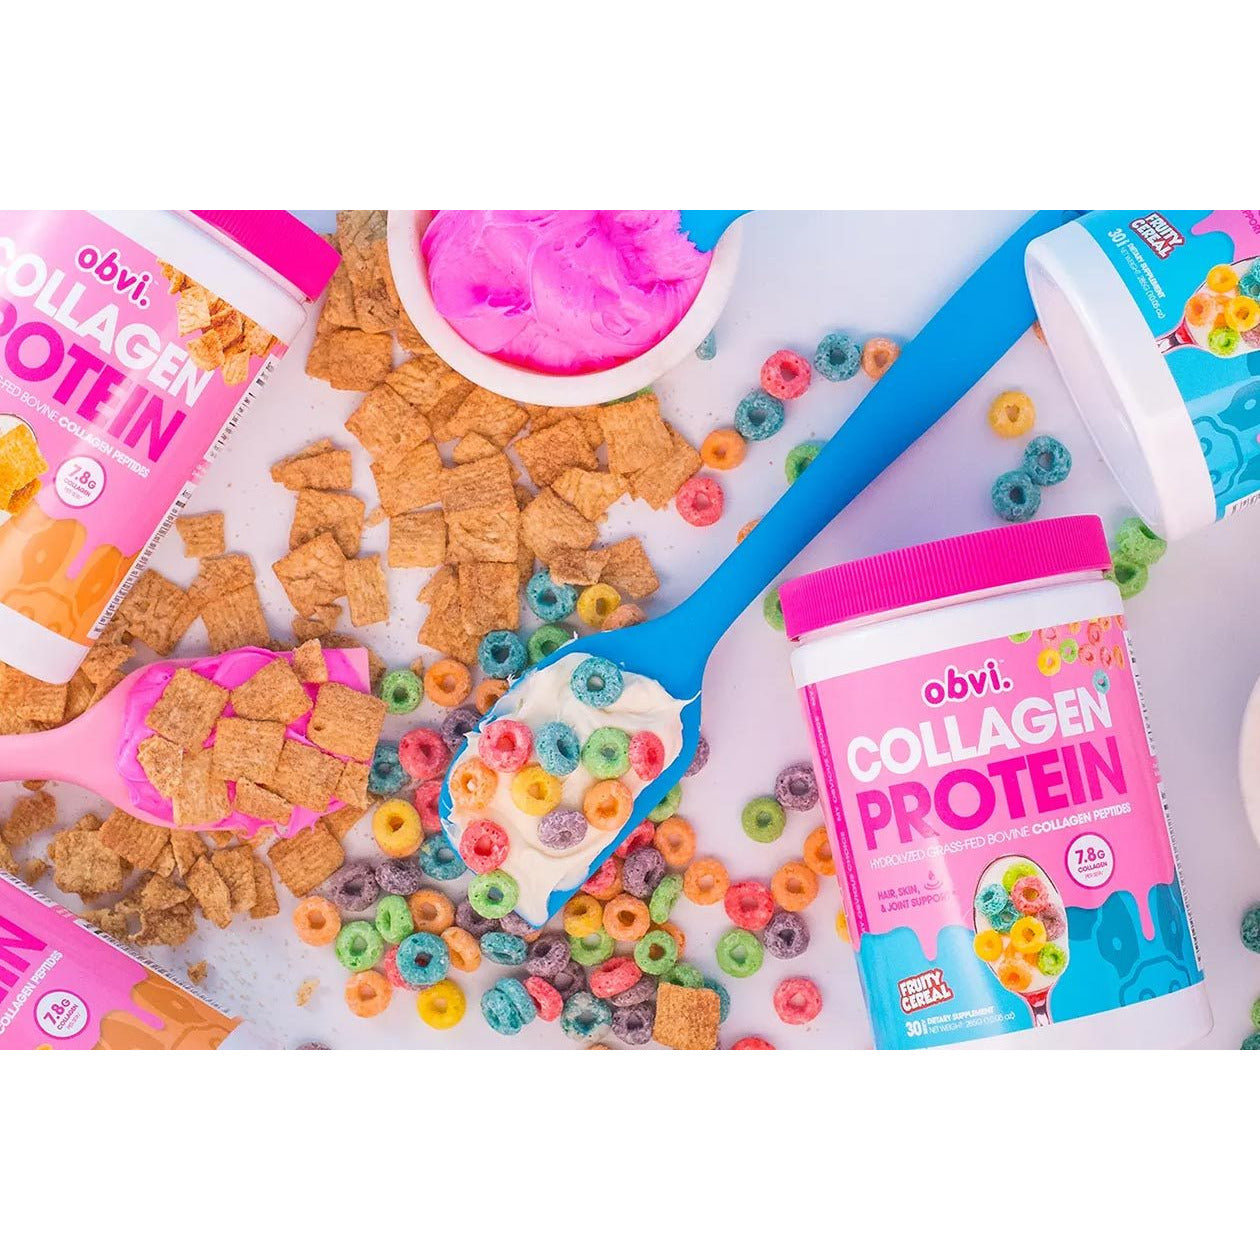 Obvi Flavoured Collagen Protein (30 servings) obvi-flavoured-collagen-protein-30-servings collagen Fruity Cereal BEST BY 03/23,Cinna Cereal,Cocoa Cereal  BEST BY 03/23,Frosted Cereal,Honey O's BEST BY 03/2022,LIMITED EDITION! Birthday Cupcakes BEST BY 06/2022,LIMITED EDITION Pumpkin Spice Latte,LIMITED EDITION! Pink Velvet,Marshmallow Cereal BEST BY 03/23,Peanut Butter Cups BEST BY 05/23 OBVI